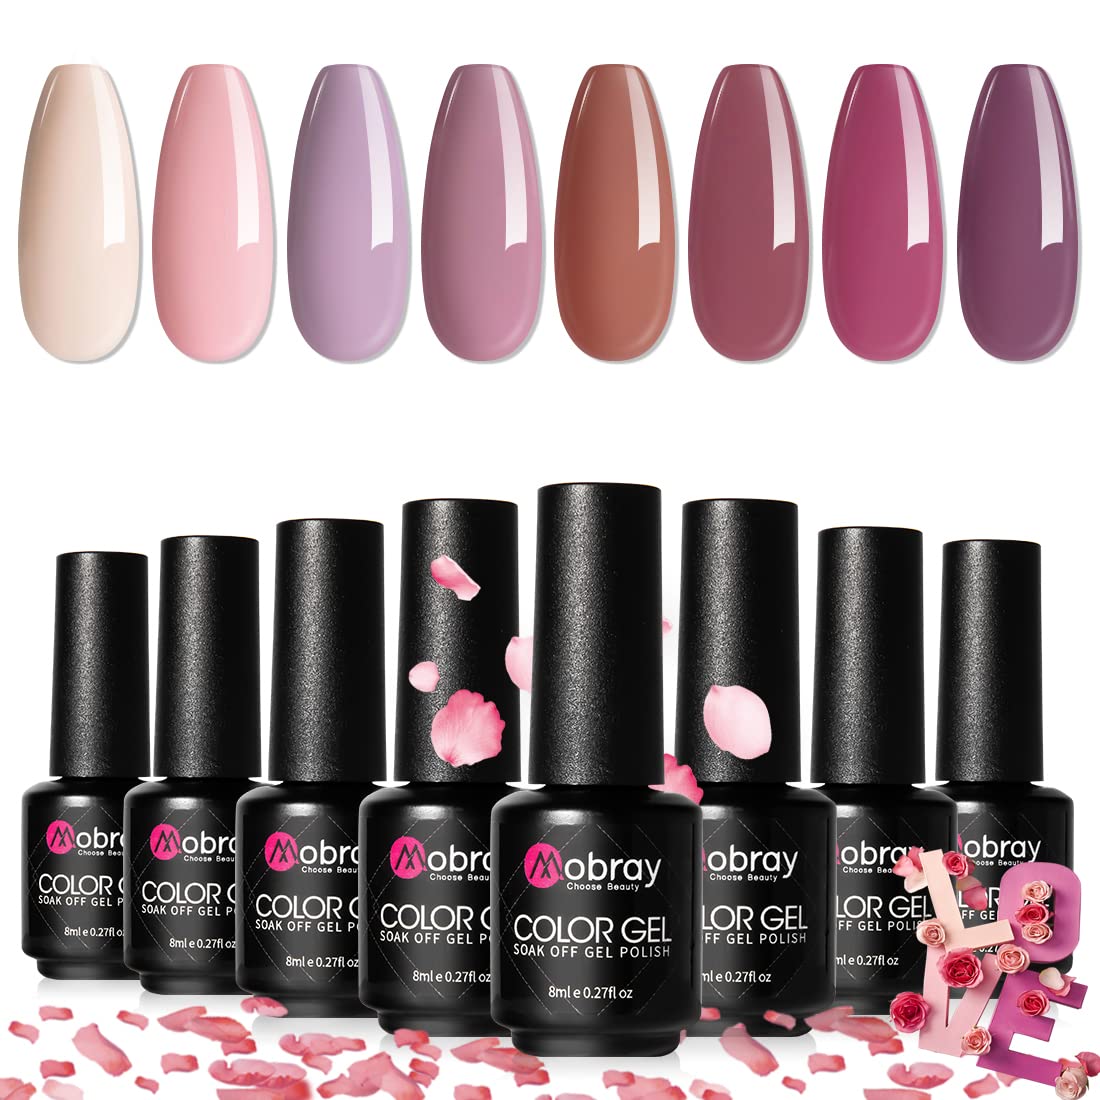 Mobray Gel Nail Polish Set, 6 Spring Summer Blue Nude Purple Colors With No Wipe Top Coat And Base Coat for Nail Art Manicure.